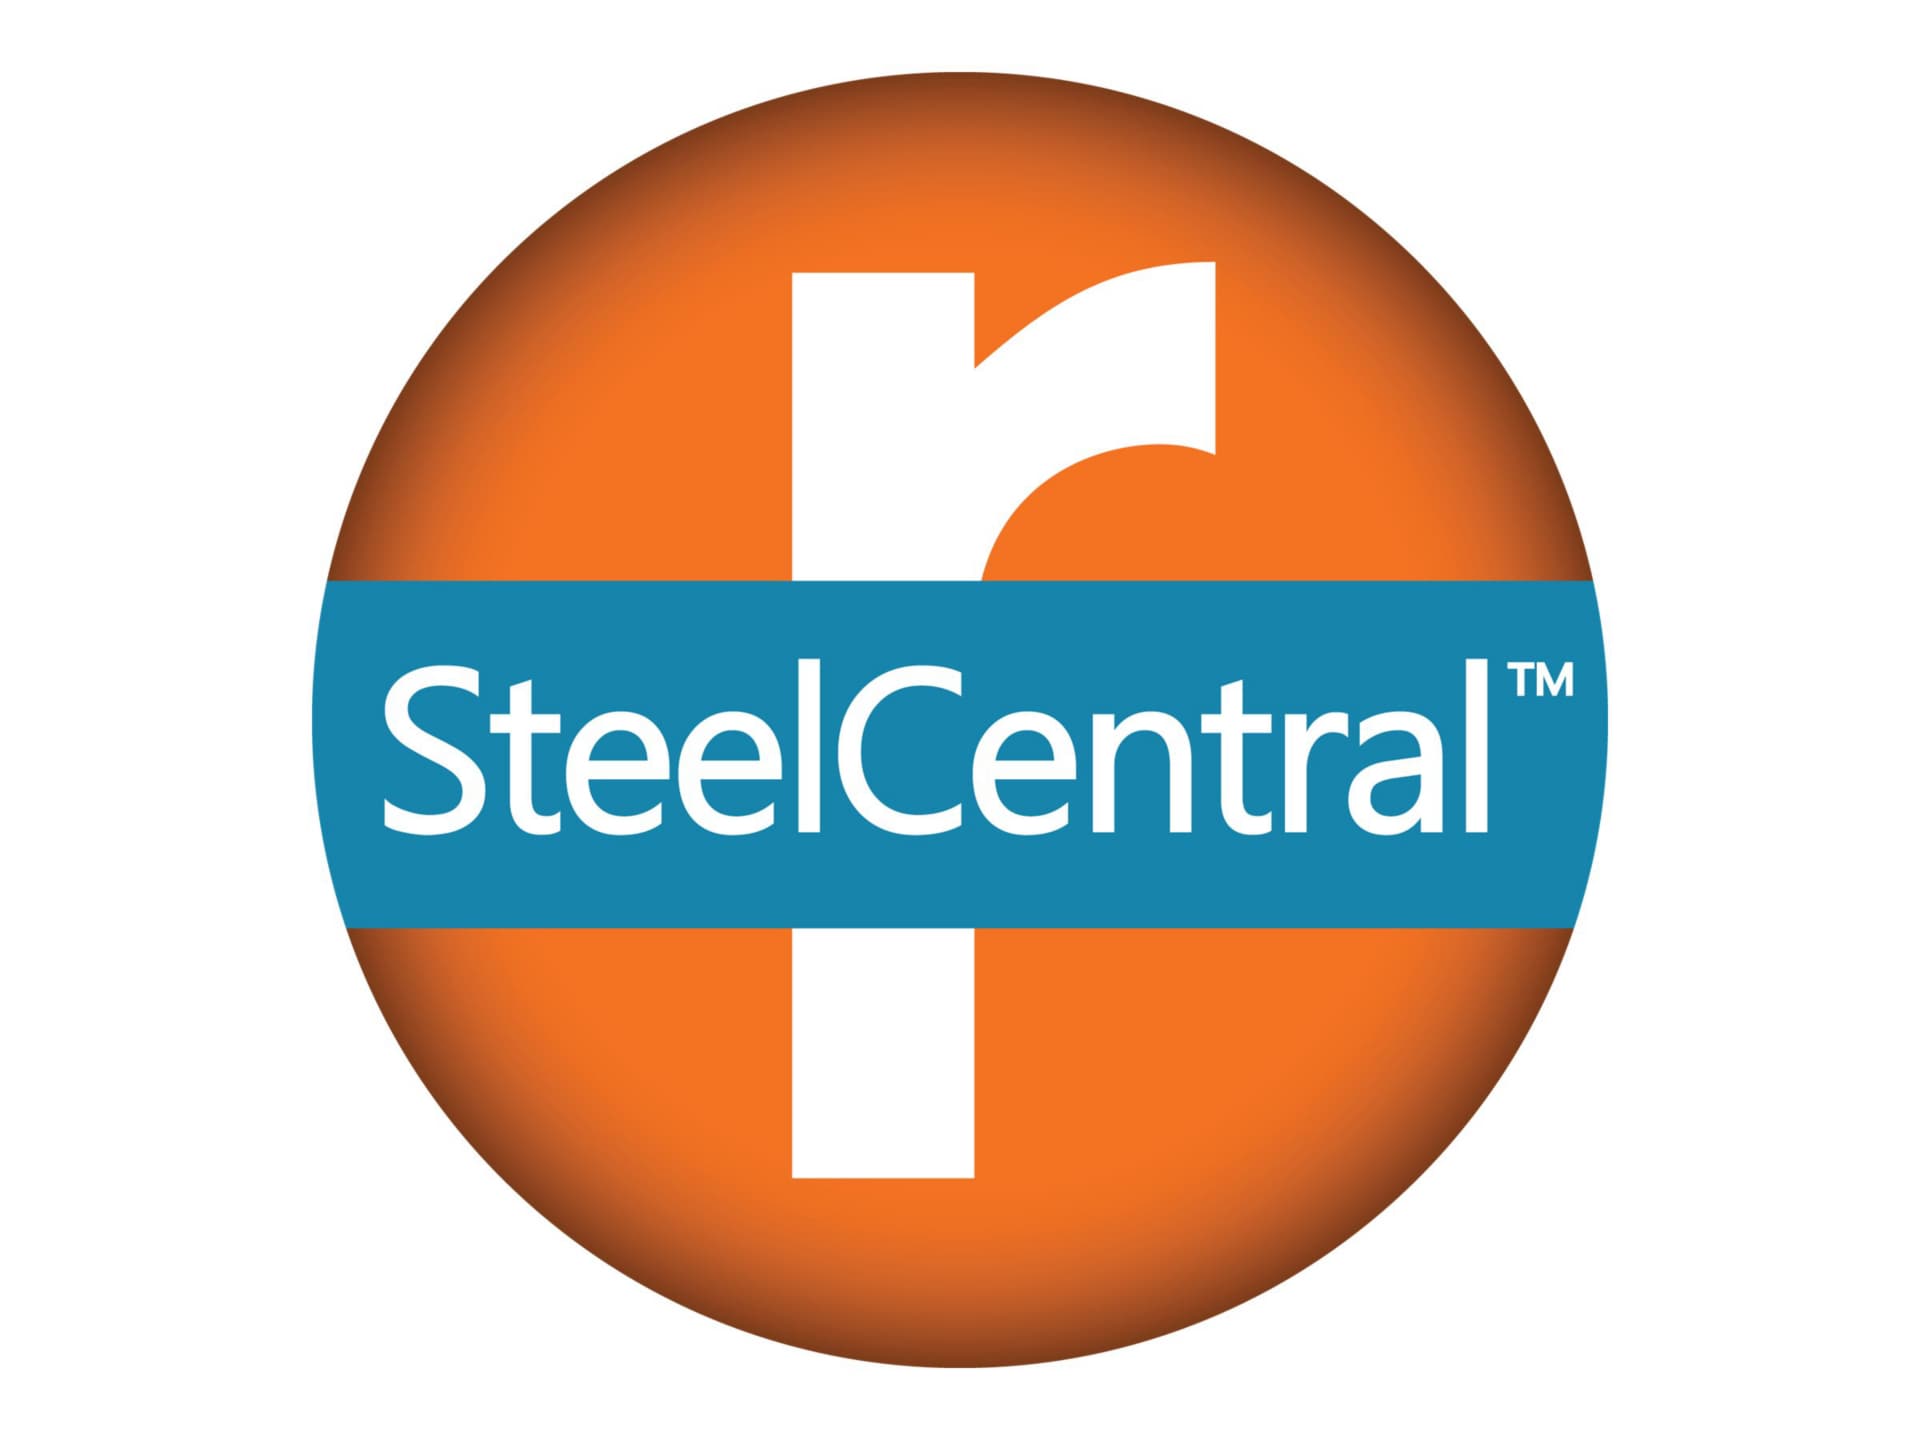 SteelCentral NetProfiler 4280 - subscription license (1 month) + Gold Suppo